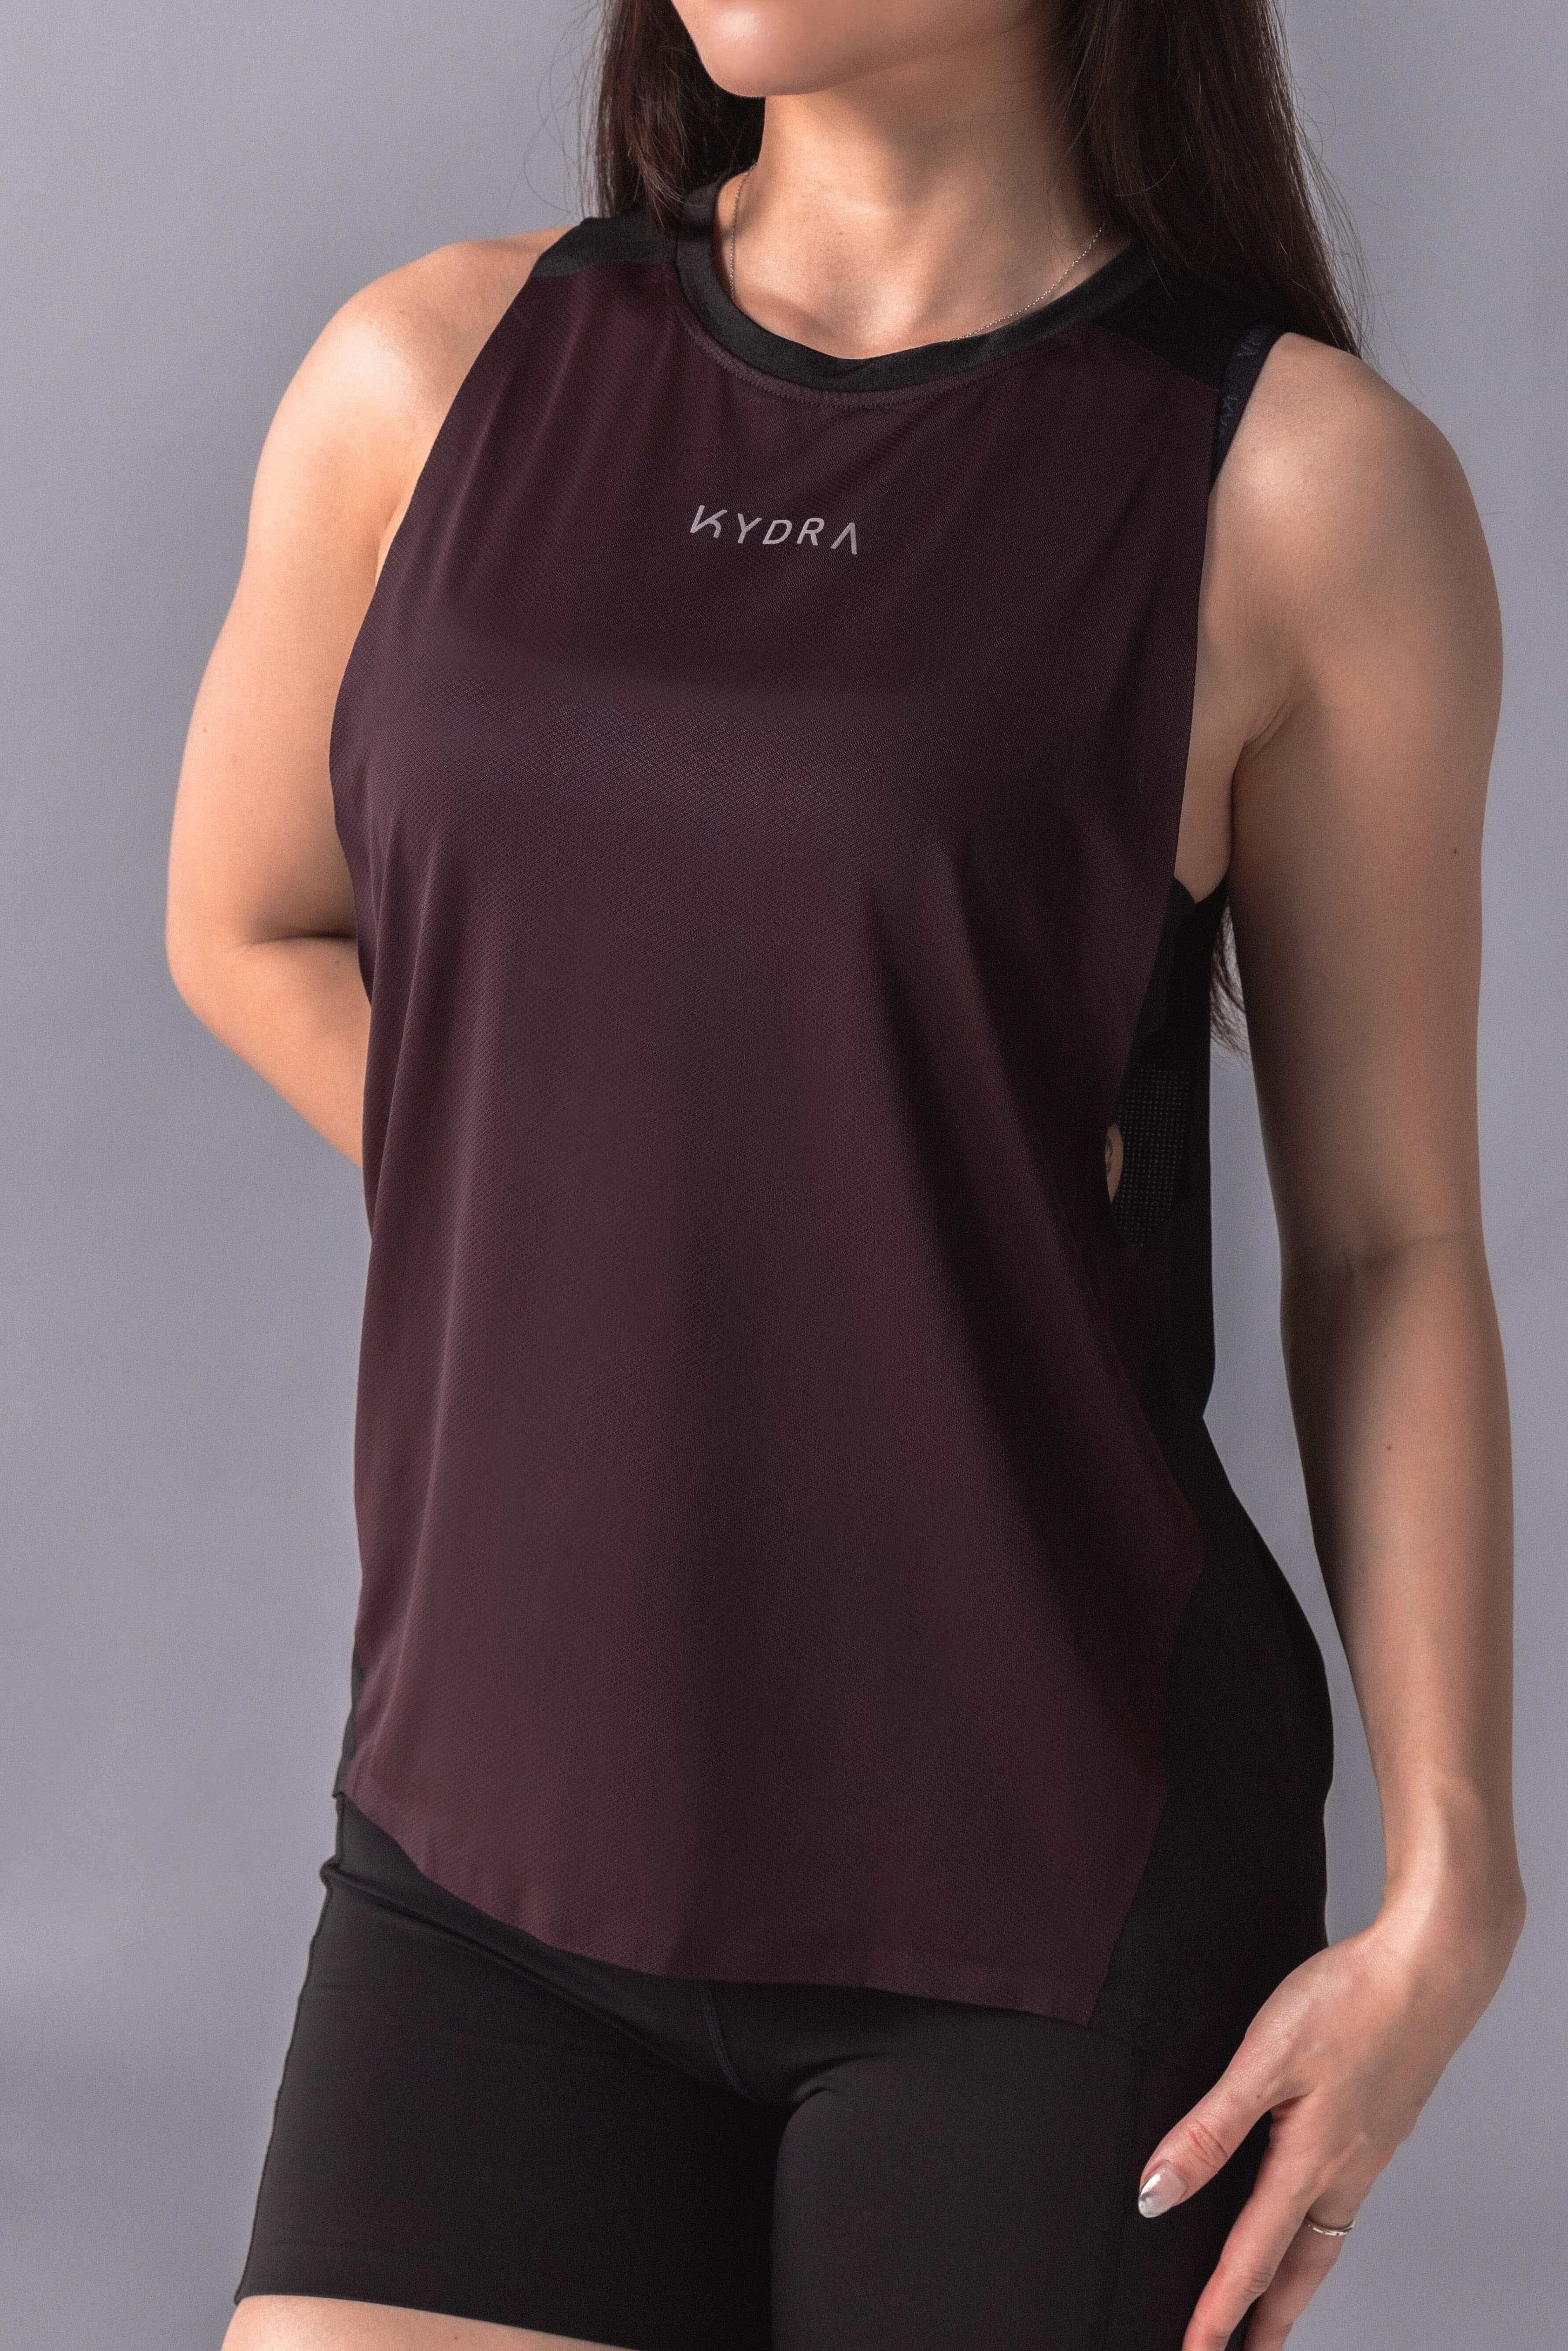 Kydra Athletics - It's that time of the week! Snag yourself a brand new set  of activewear with 20% off everything on kydra.co 🛒 Sale ends 12 July.